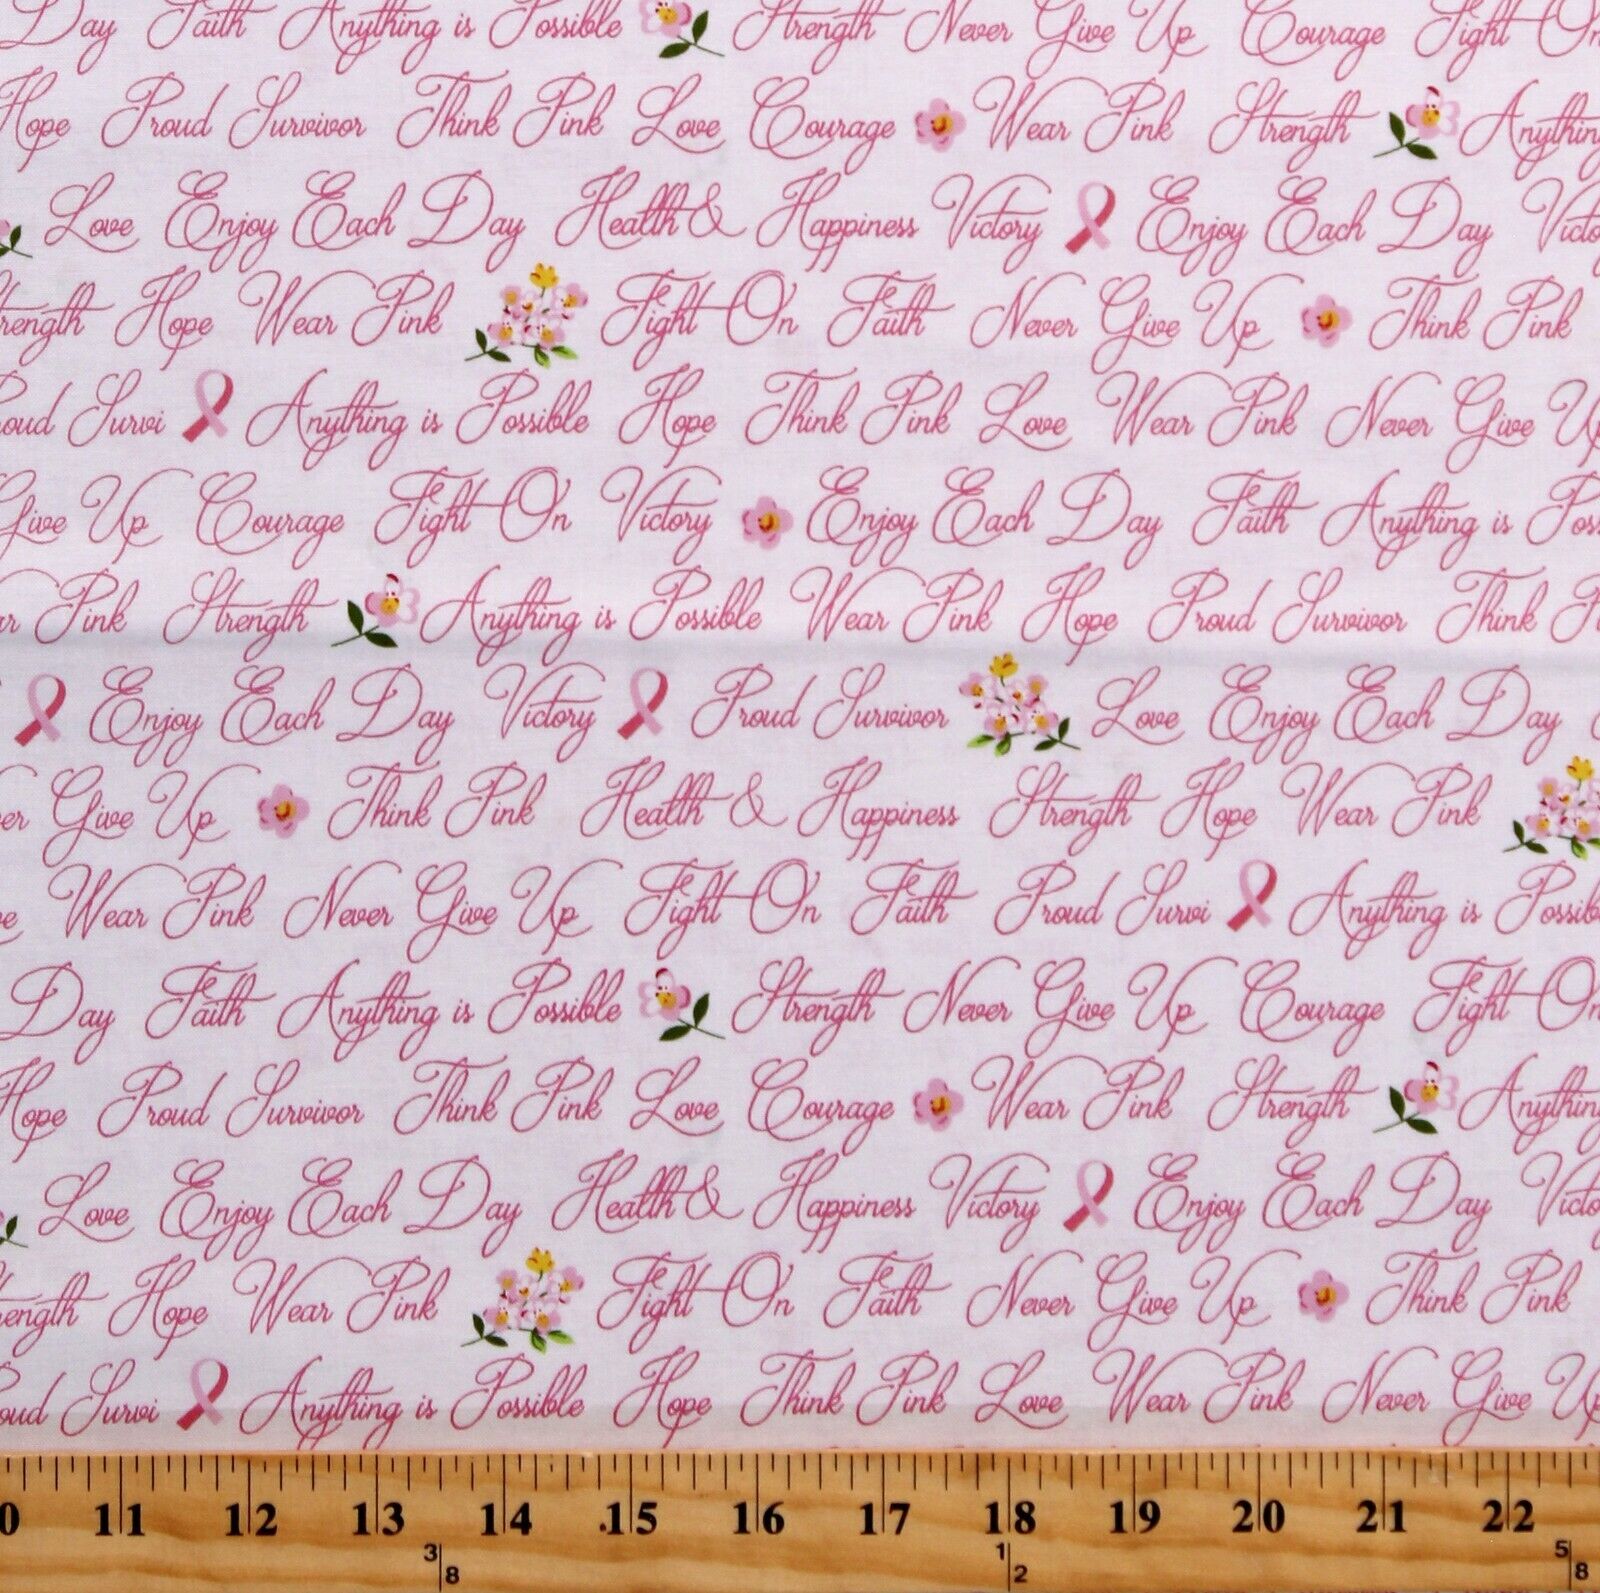 Cotton Anything is Possible Breast Cancer Fabric Print by the Yard D770.81